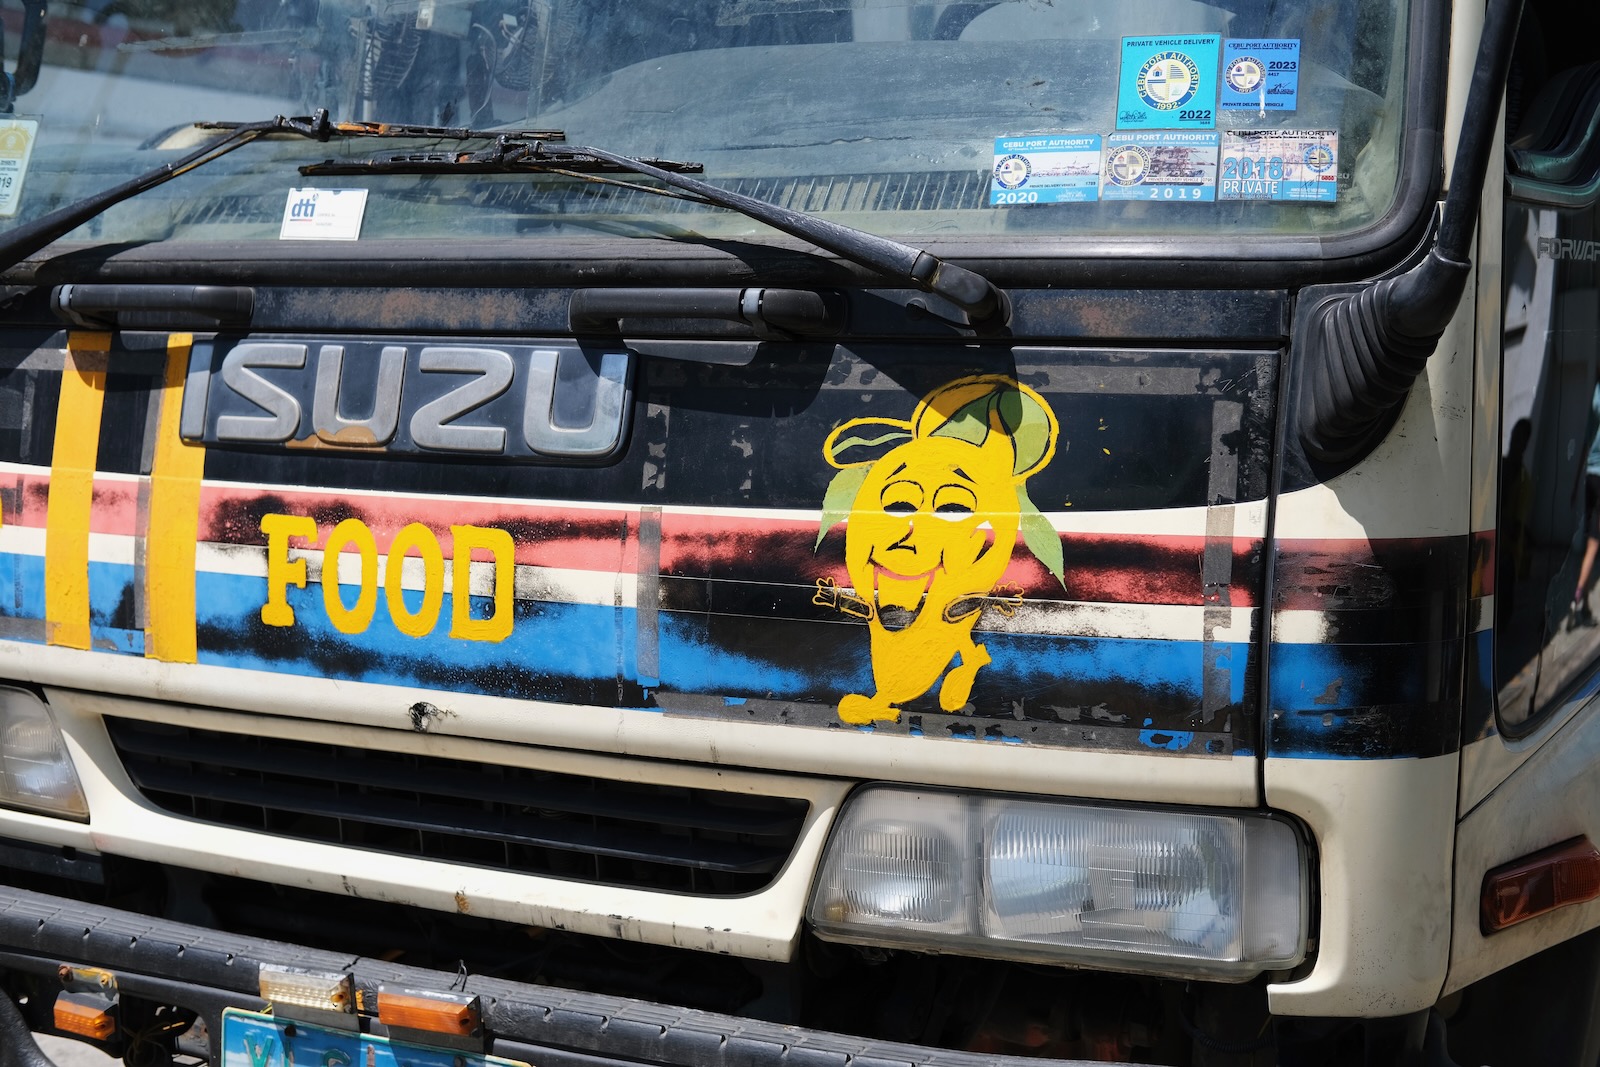 A truck painted with the word “Food” next to a smiling mango.